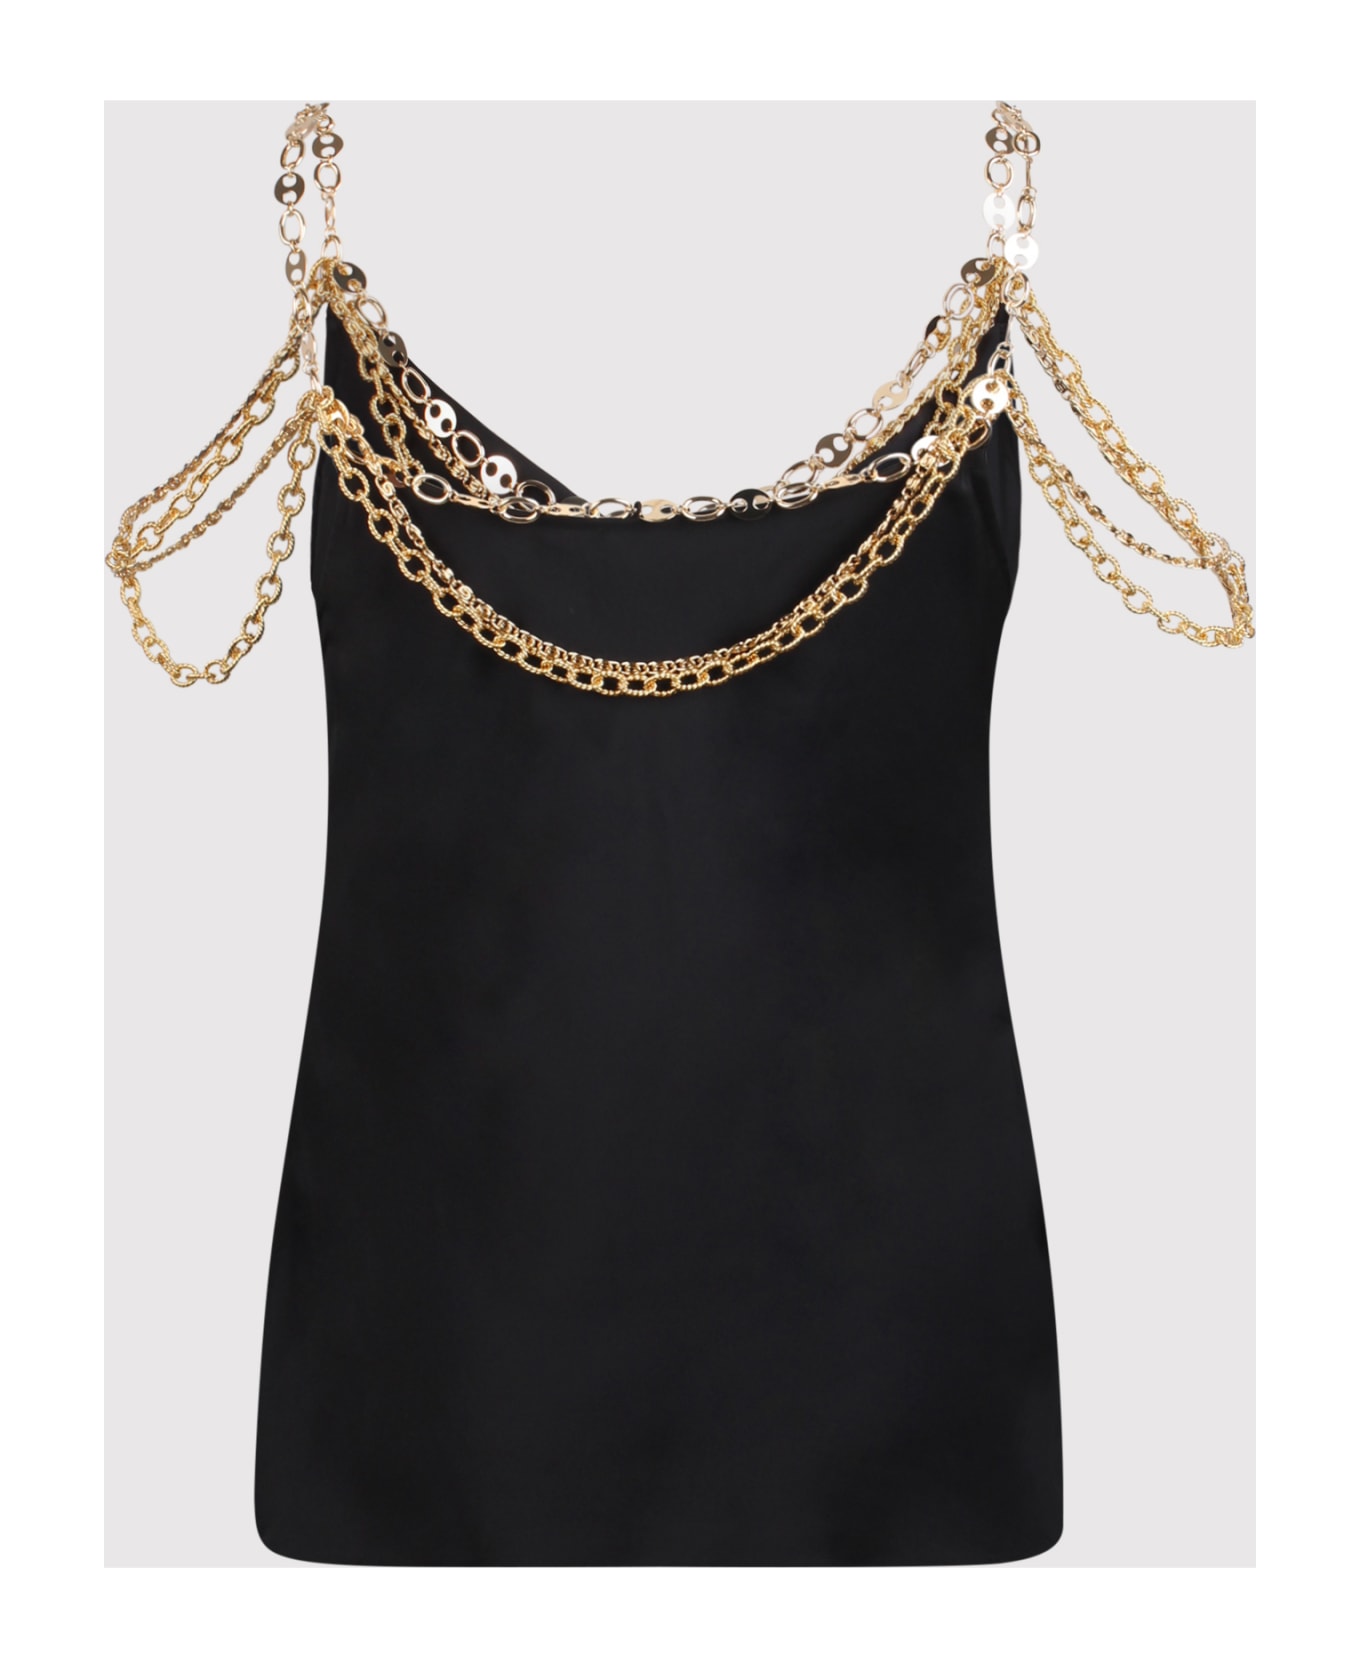 Paco Rabanne Rabanne Black Top In Gold With Mesh And Chain Details